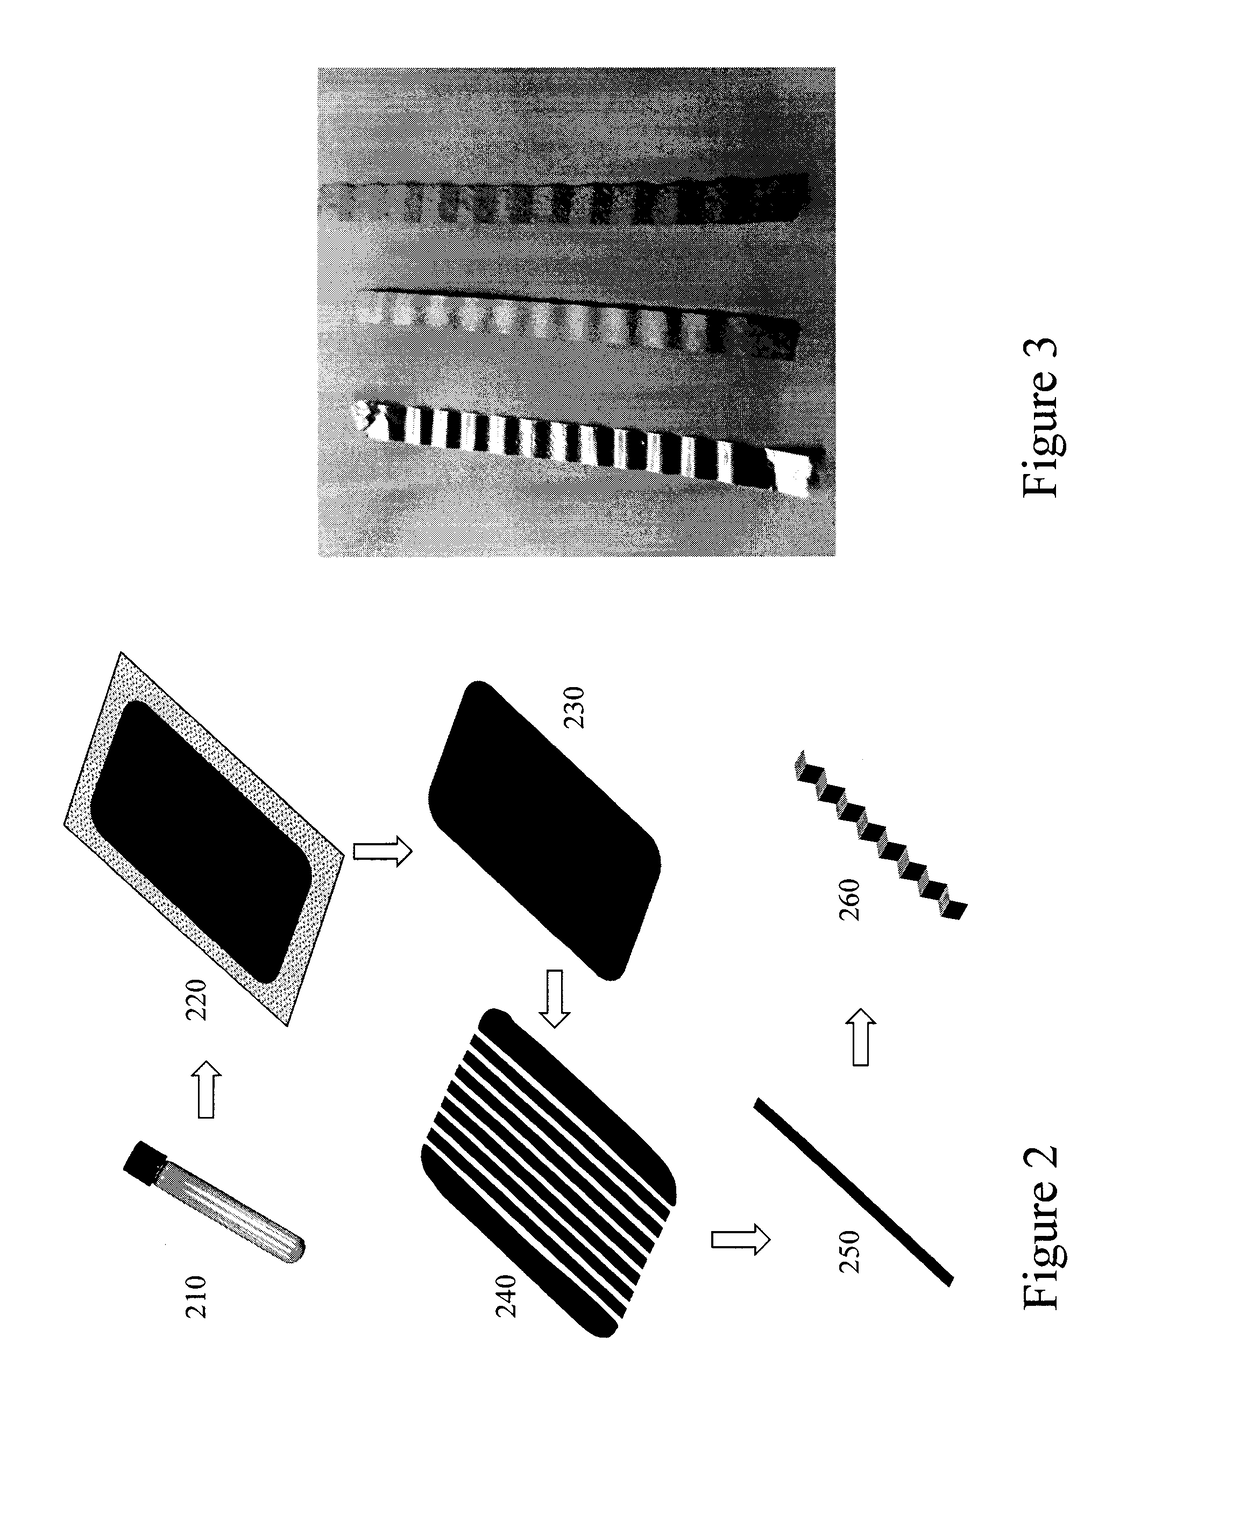 Graphene oxide based acoustic transducer methods and devices